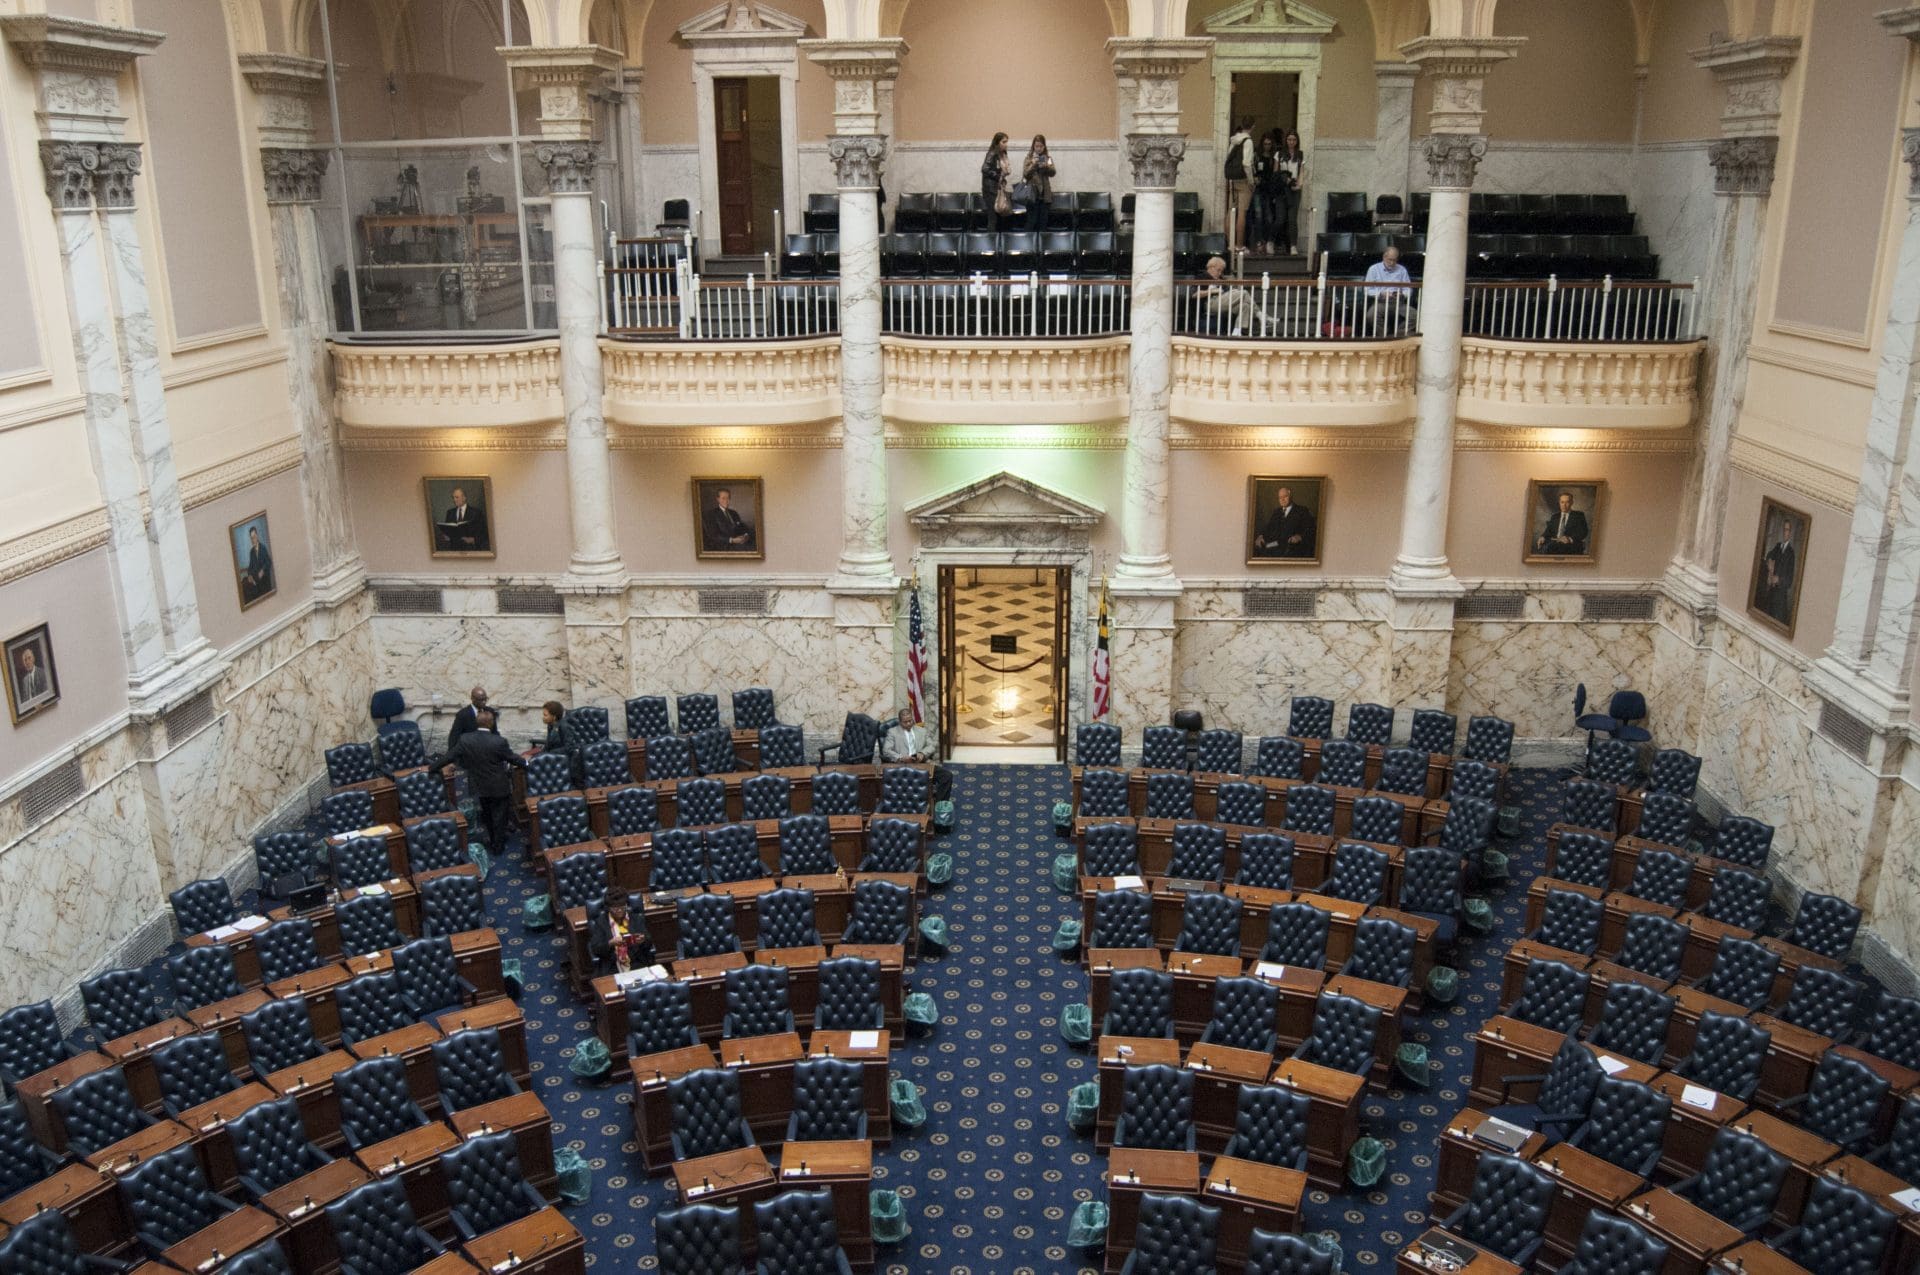 The House of Delegates chamber has been empty since March 19. Social distancing is not possible there. Photo by Rebecca Lessner, MarylandReporter.com